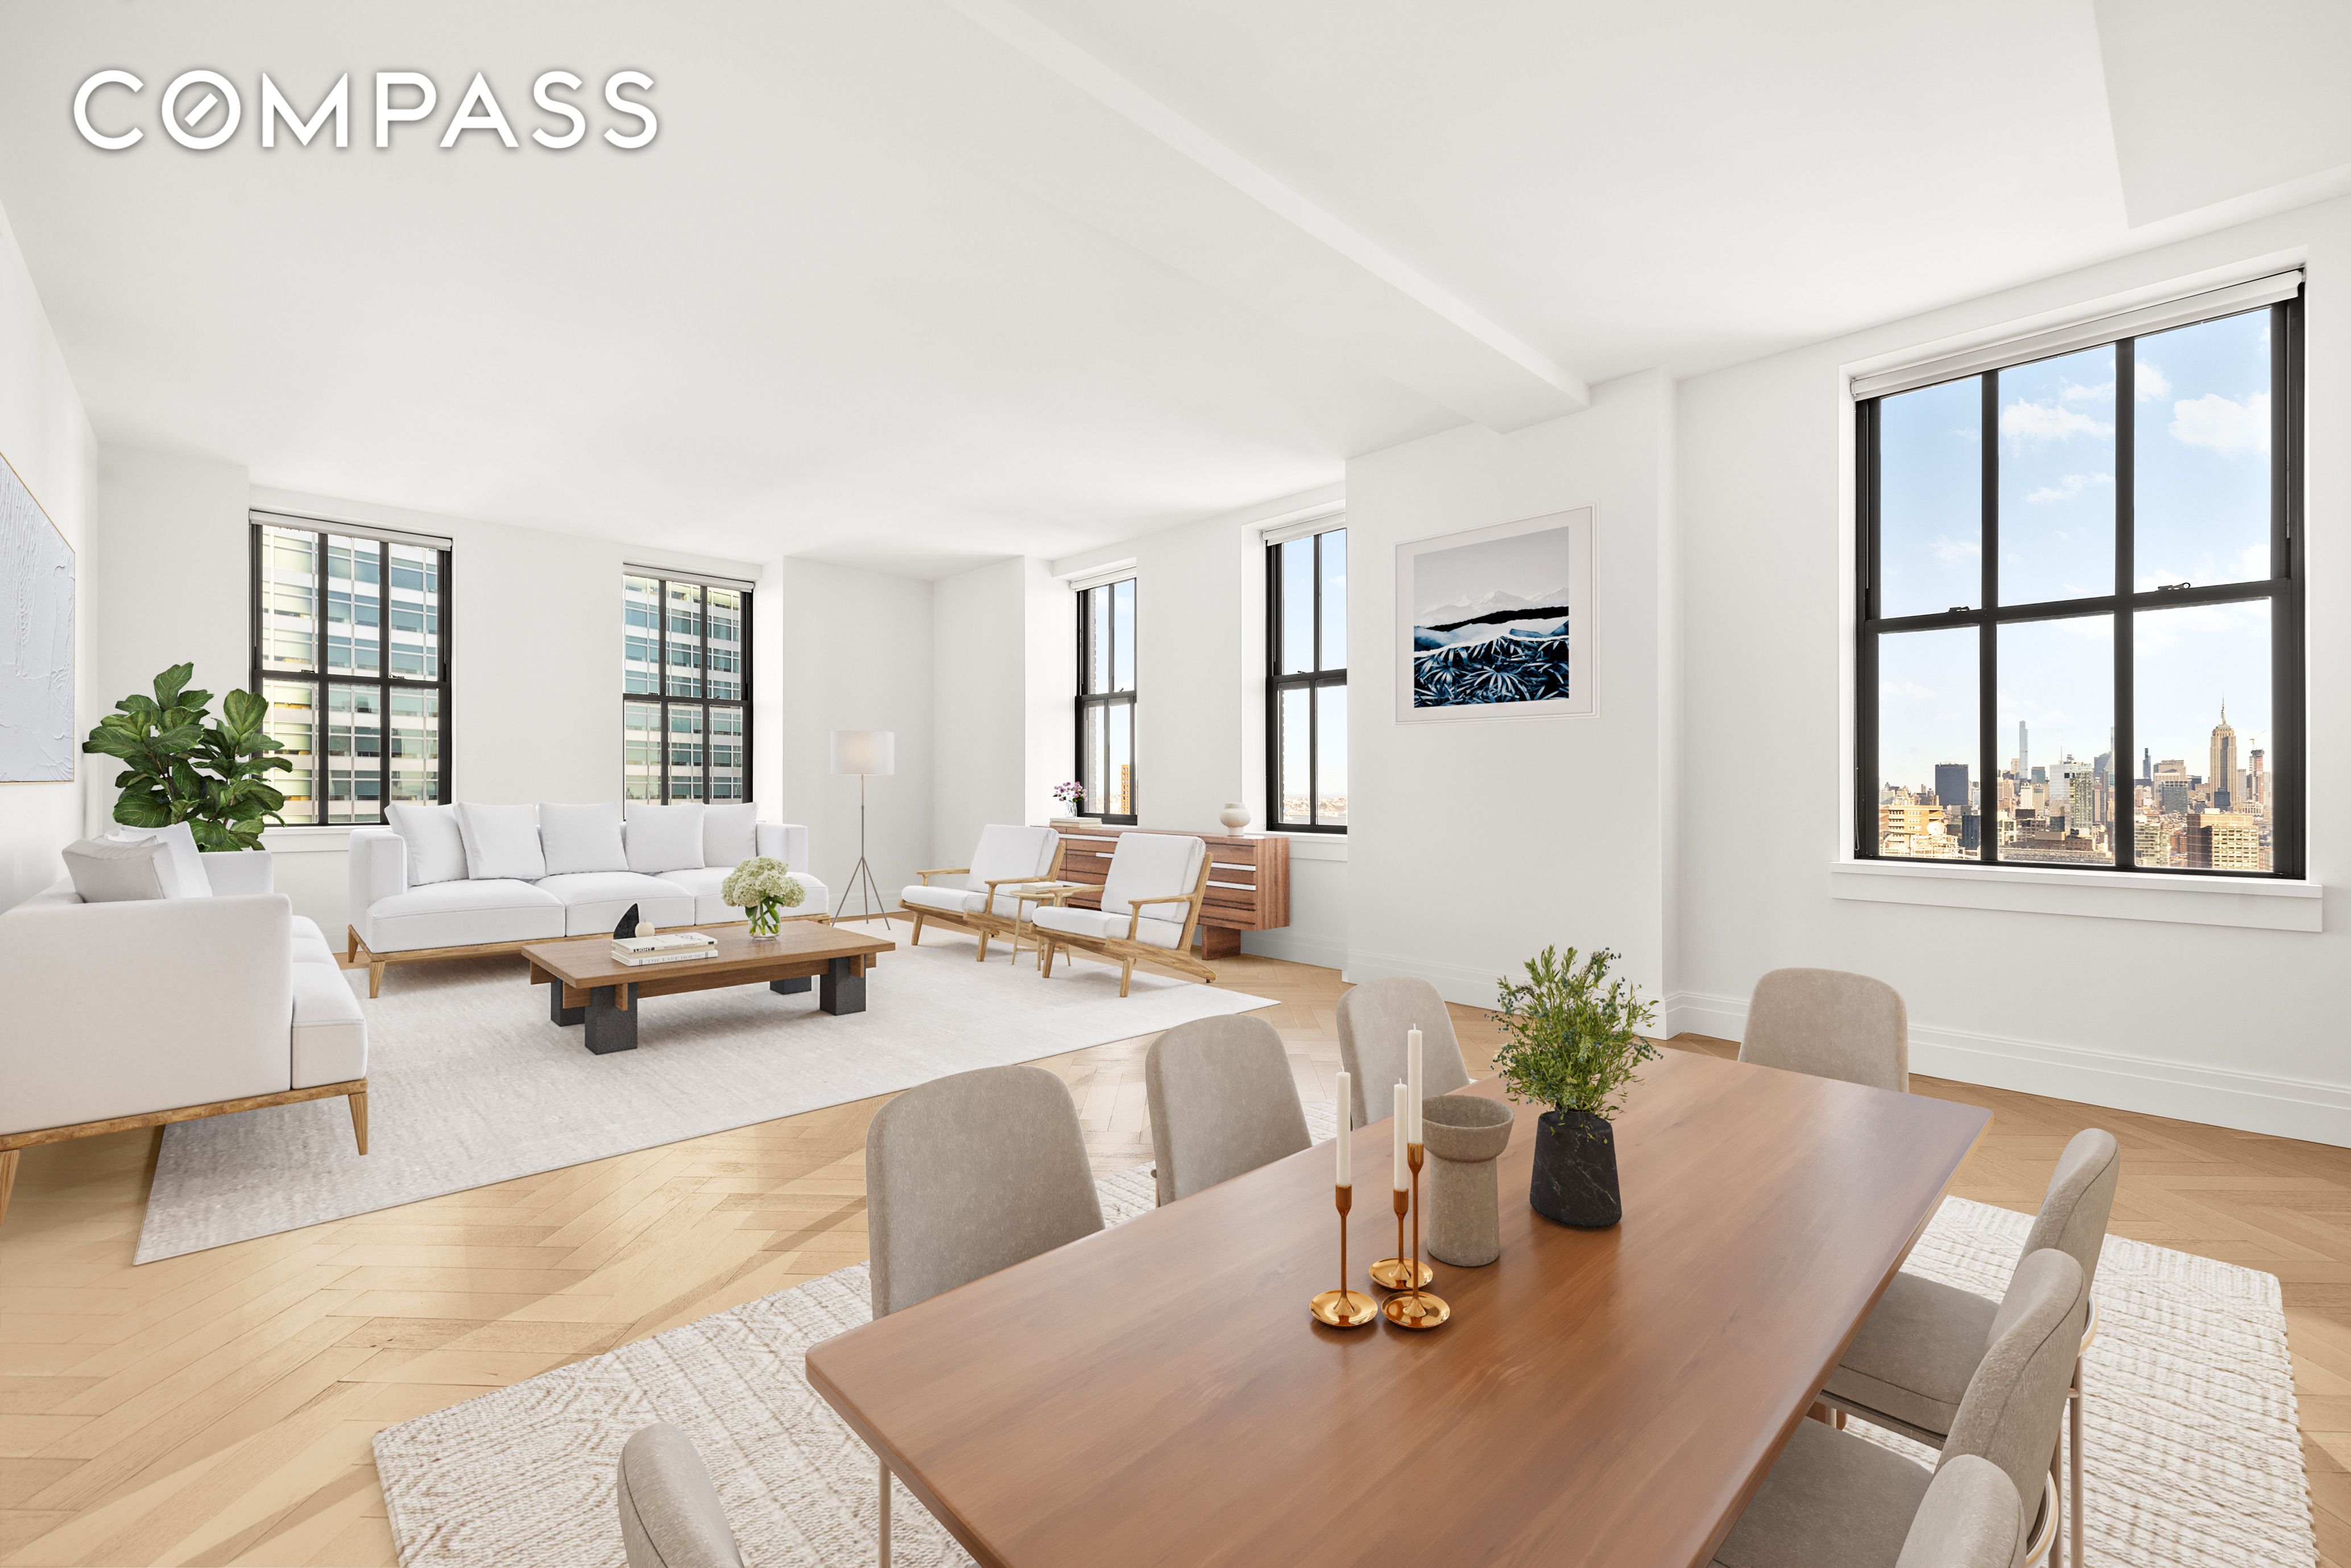 100 Barclay Street 27B, Tribeca, Downtown, NYC - 4 Bedrooms  
4 Bathrooms  
8 Rooms - 